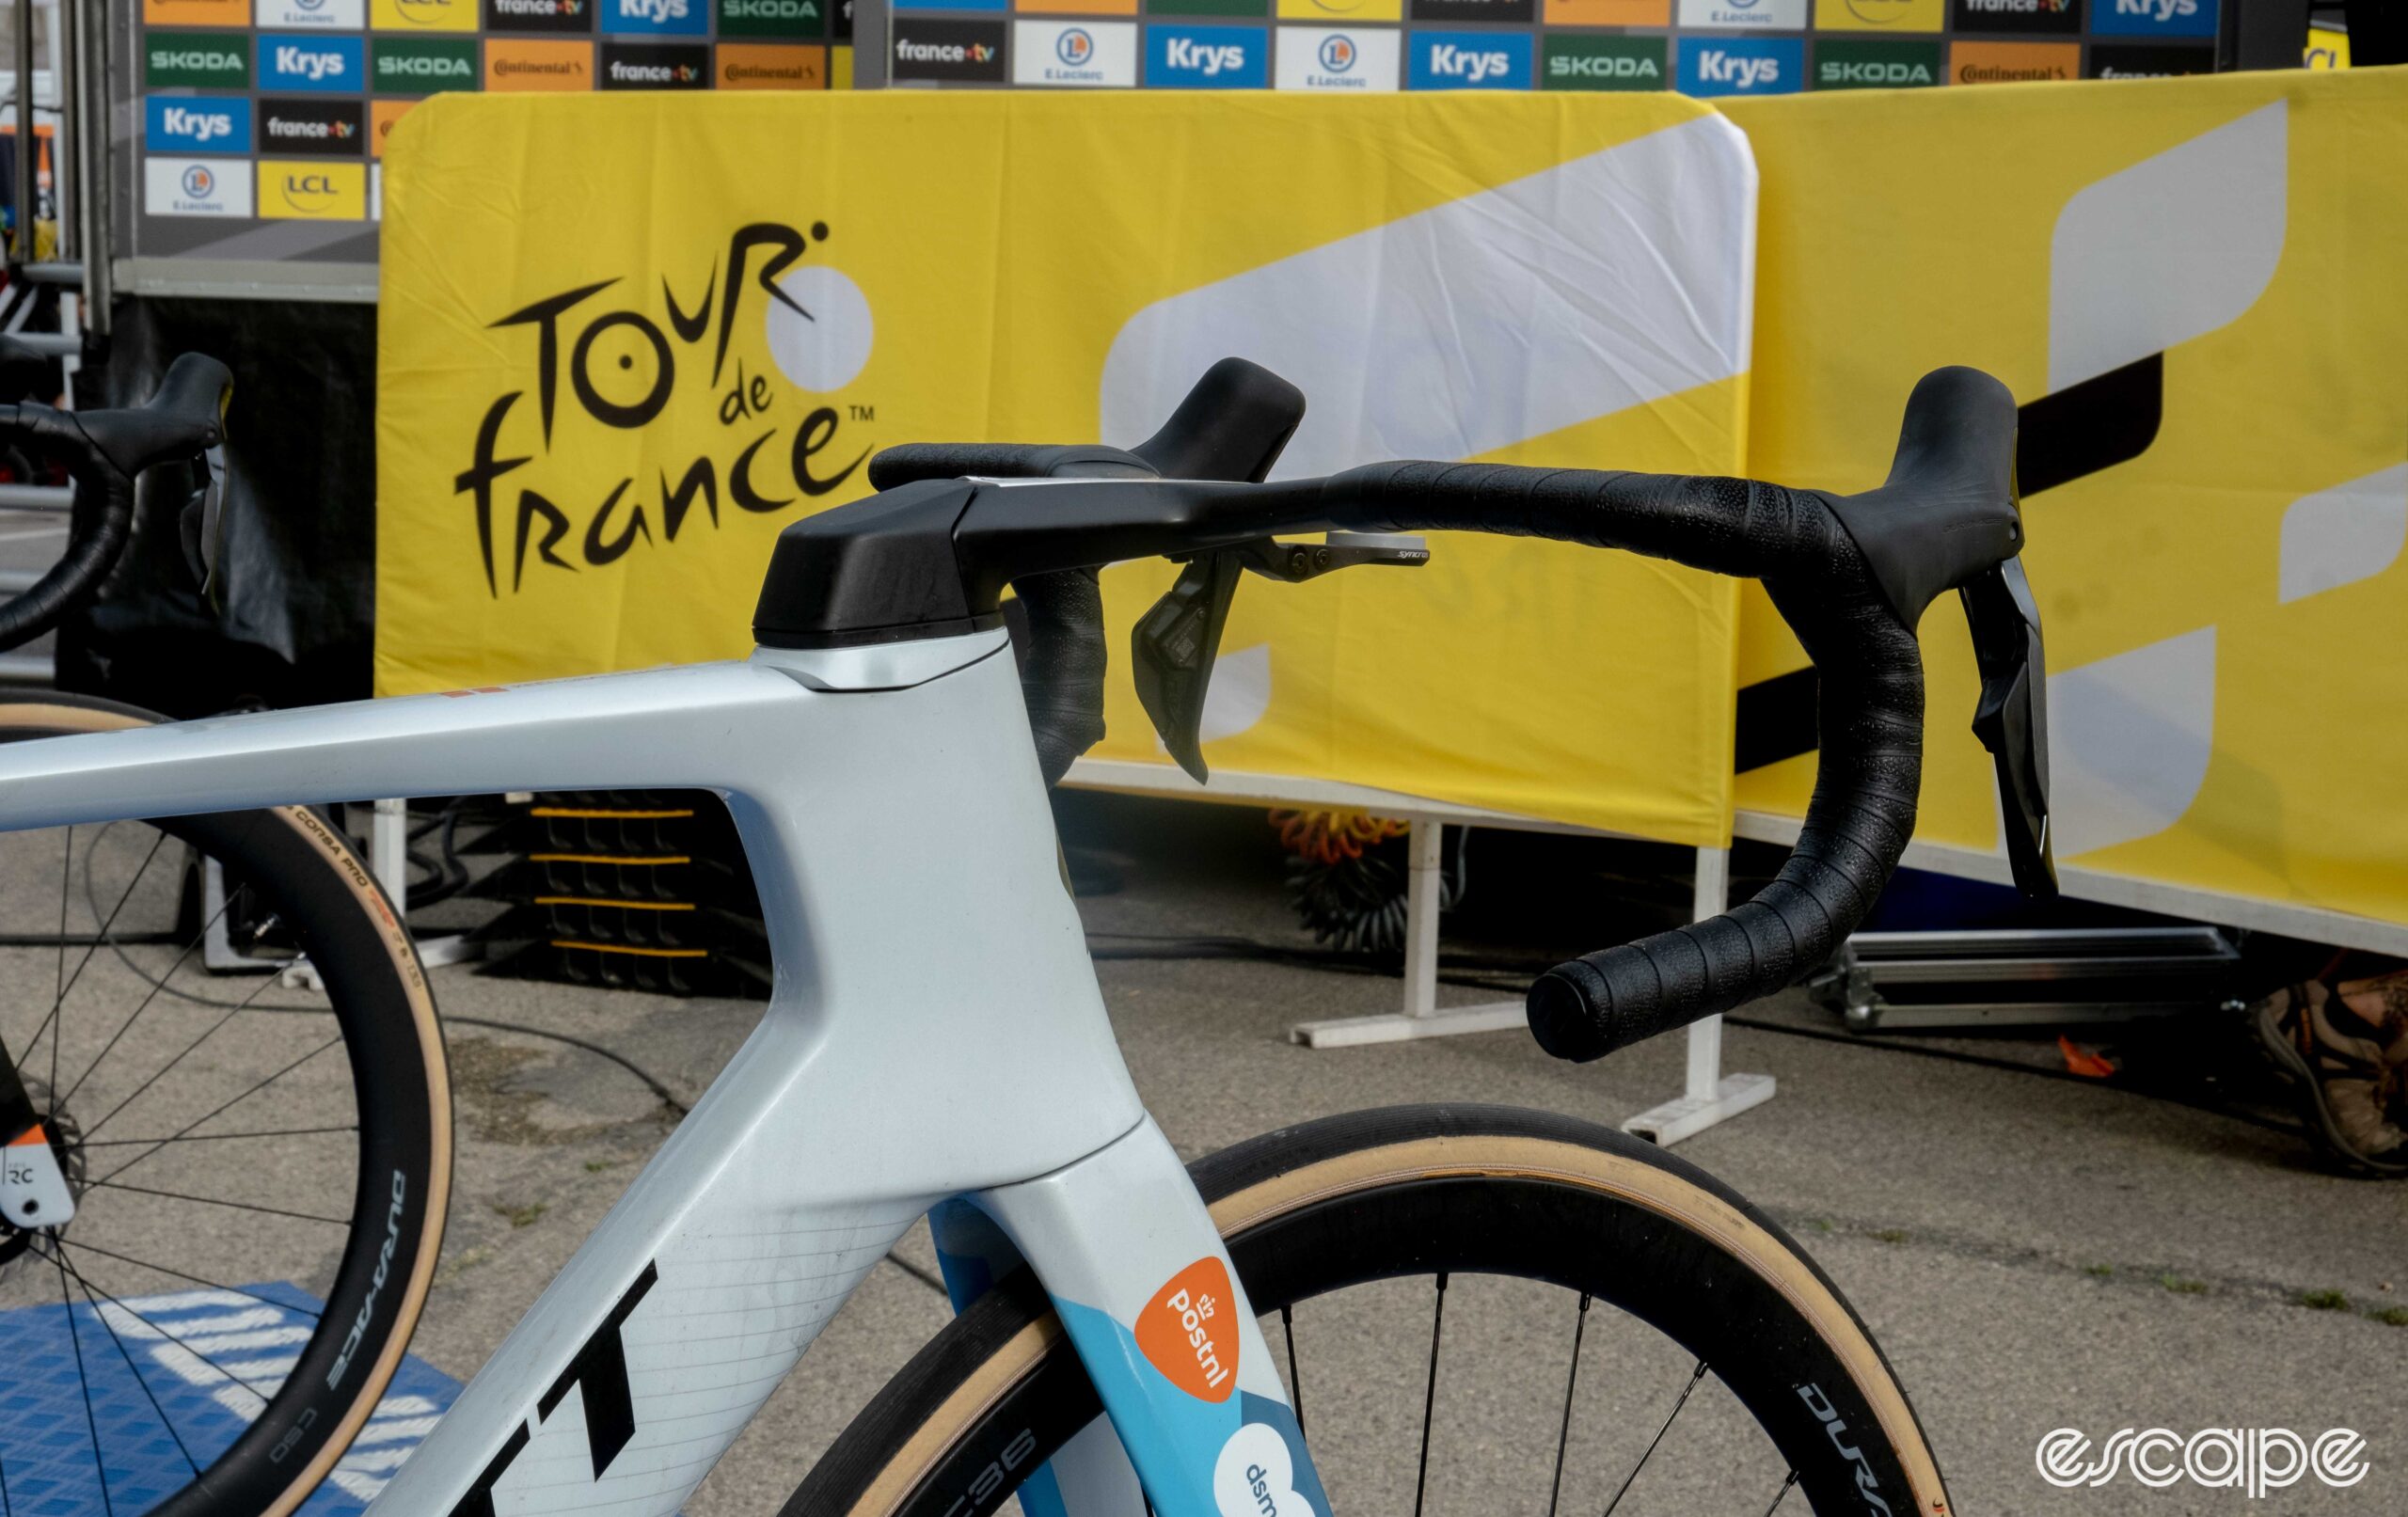 The photo shows Bardet's integrated handlebars.